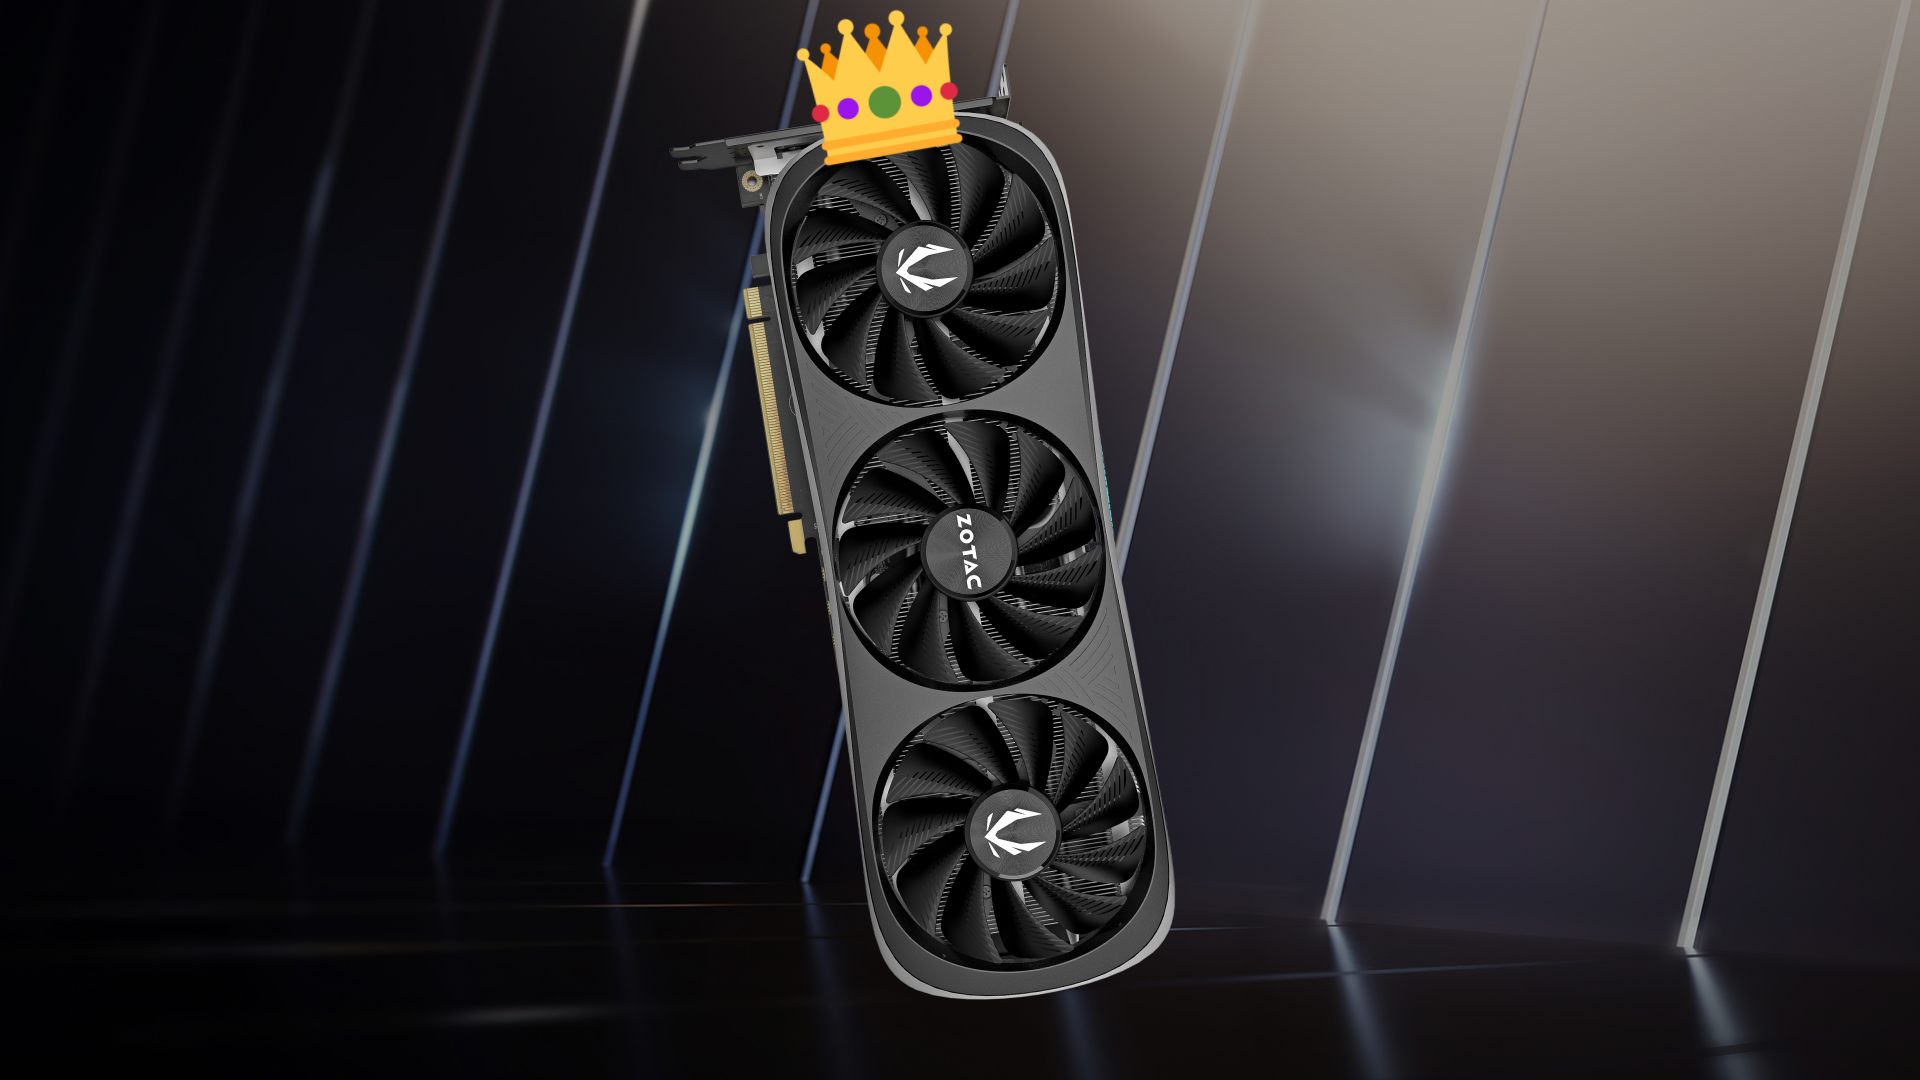 Nvidia's GeForce RTX 4070 Super Arrives For Gamers And Shakes-Up Pricing